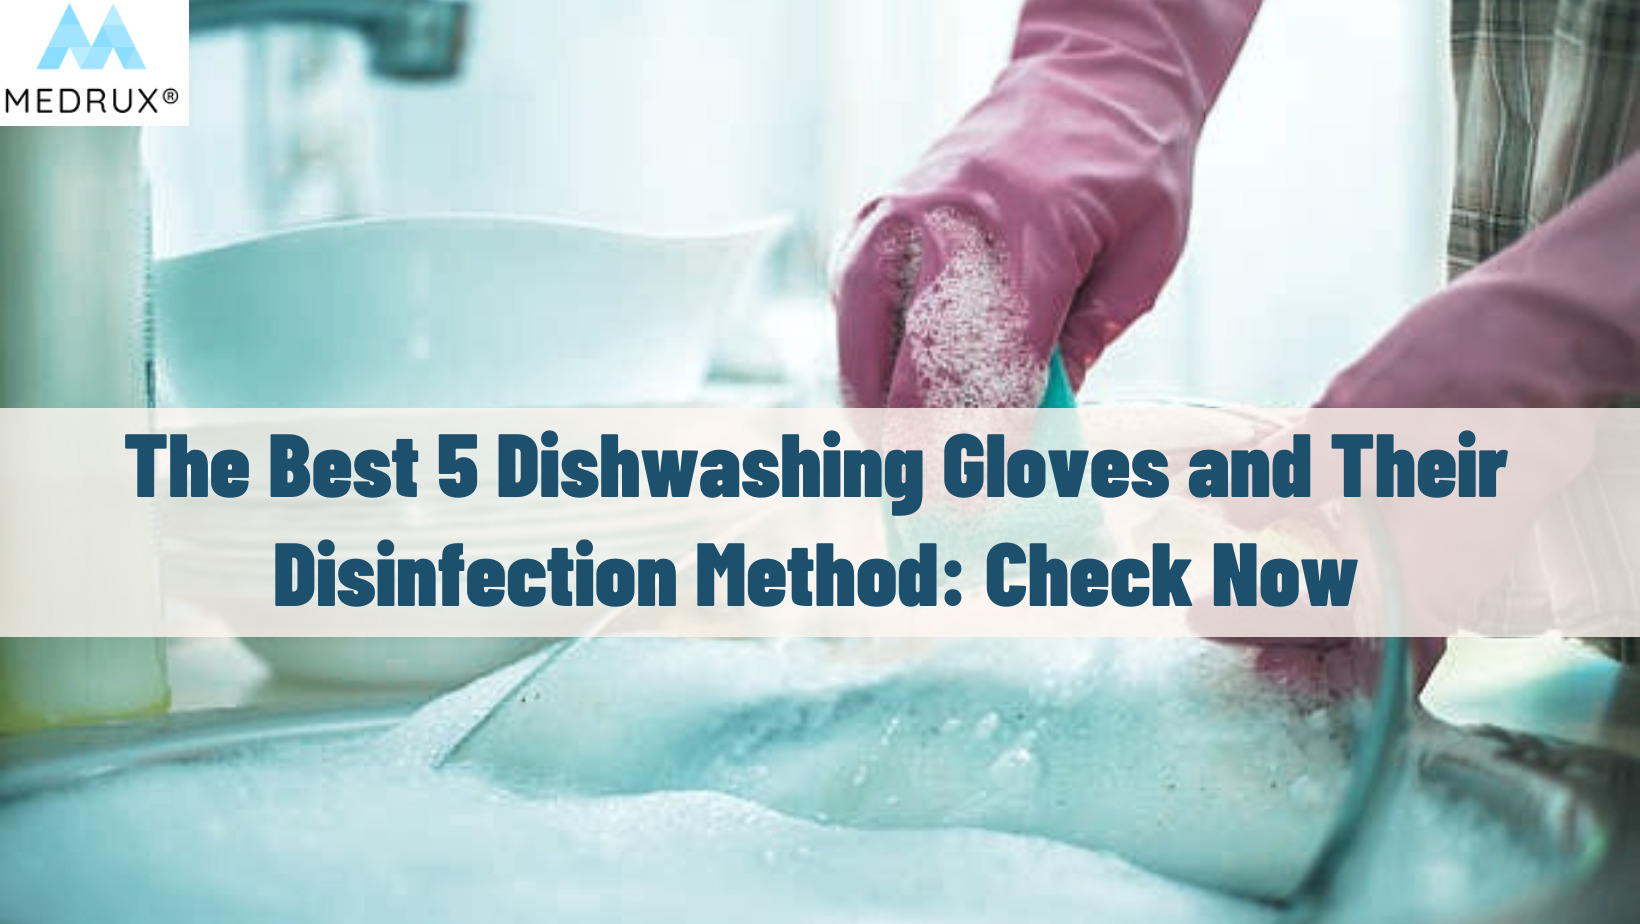 The Best 5 Dishwashing Gloves and Their Disinfection Method: Check